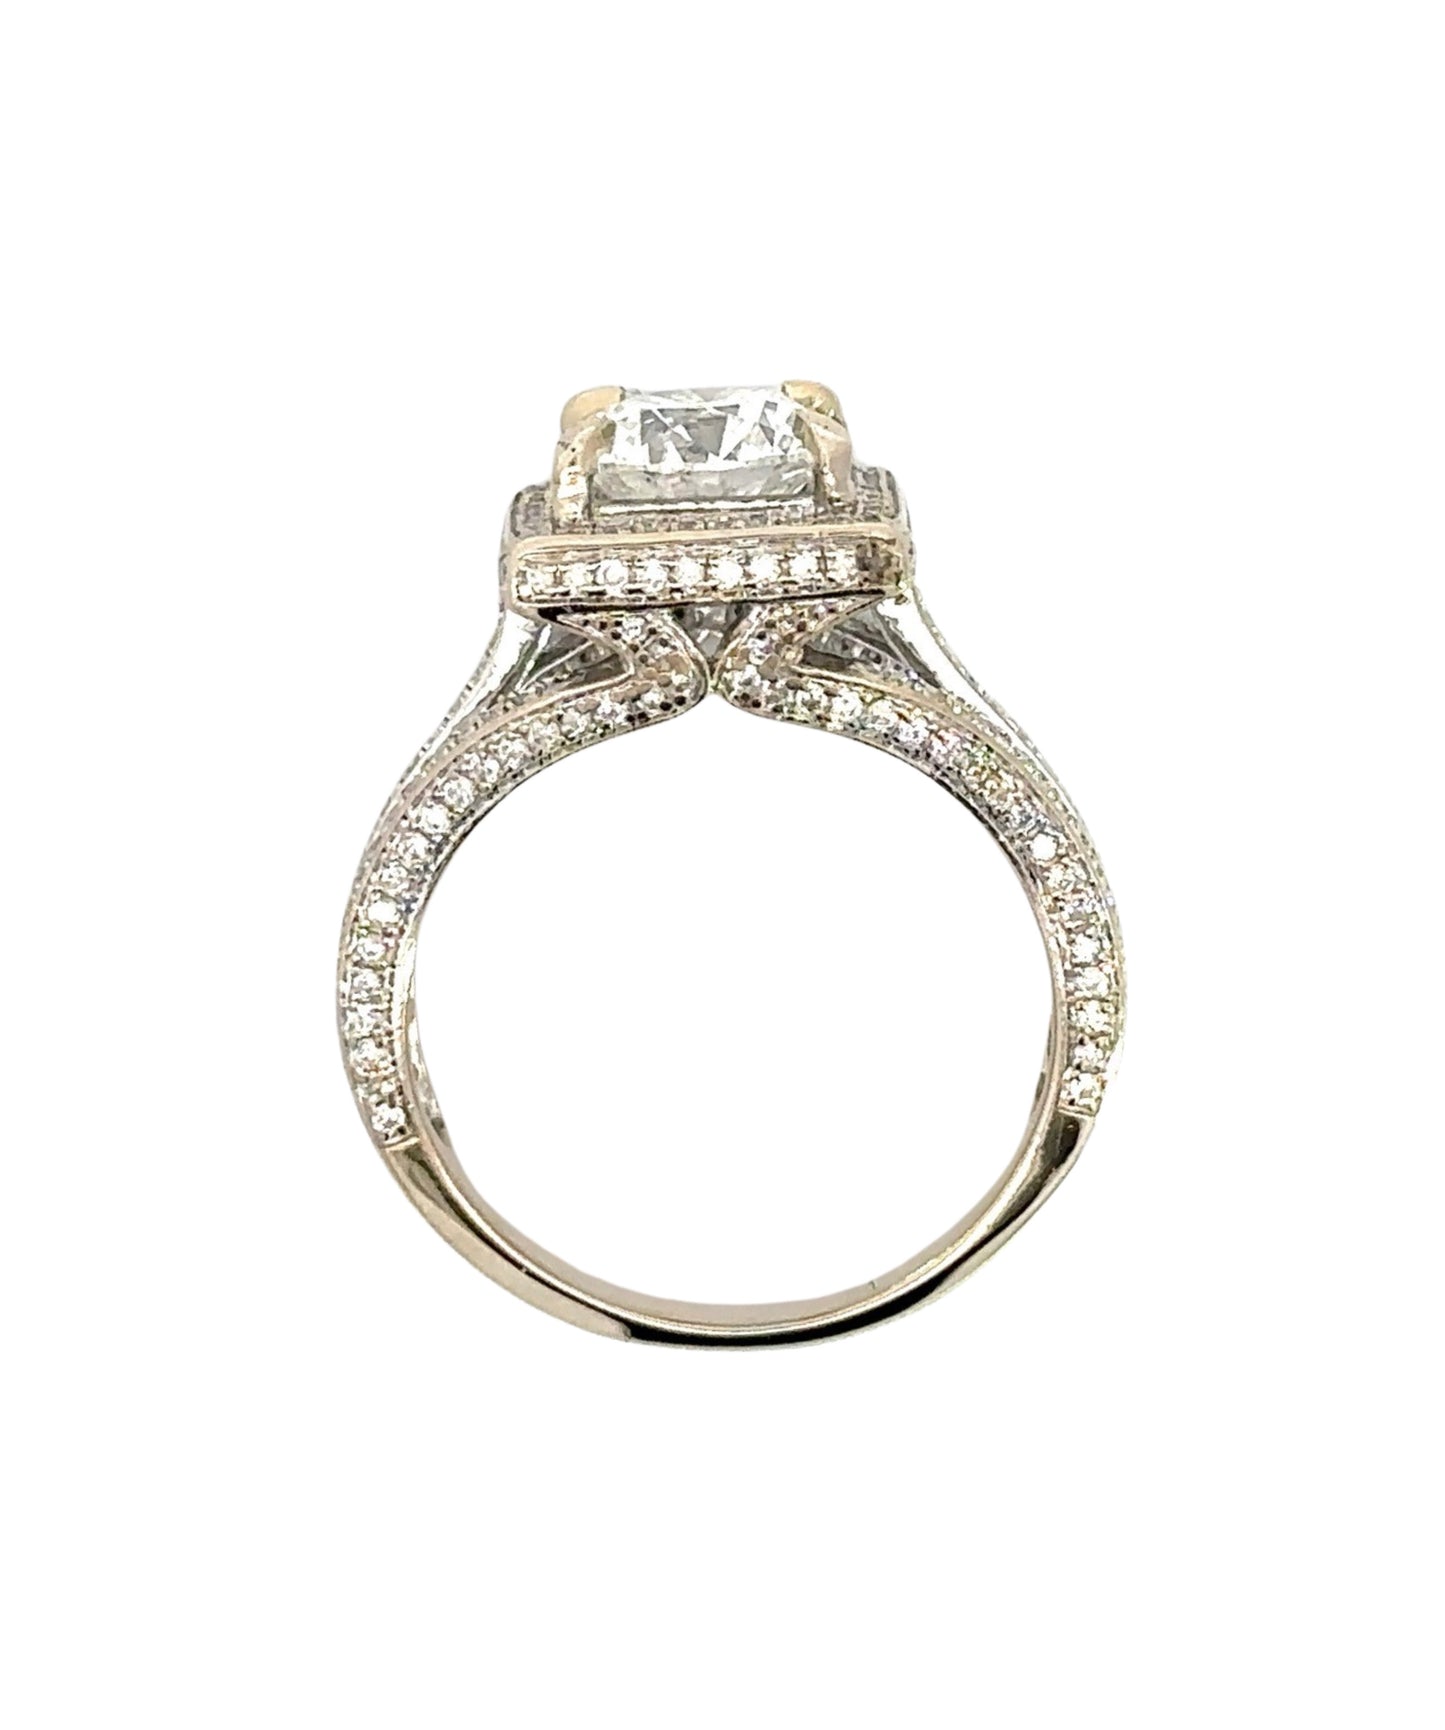 top of the side of the ring showing diamonds on the prongs, on side of band, and around center stone